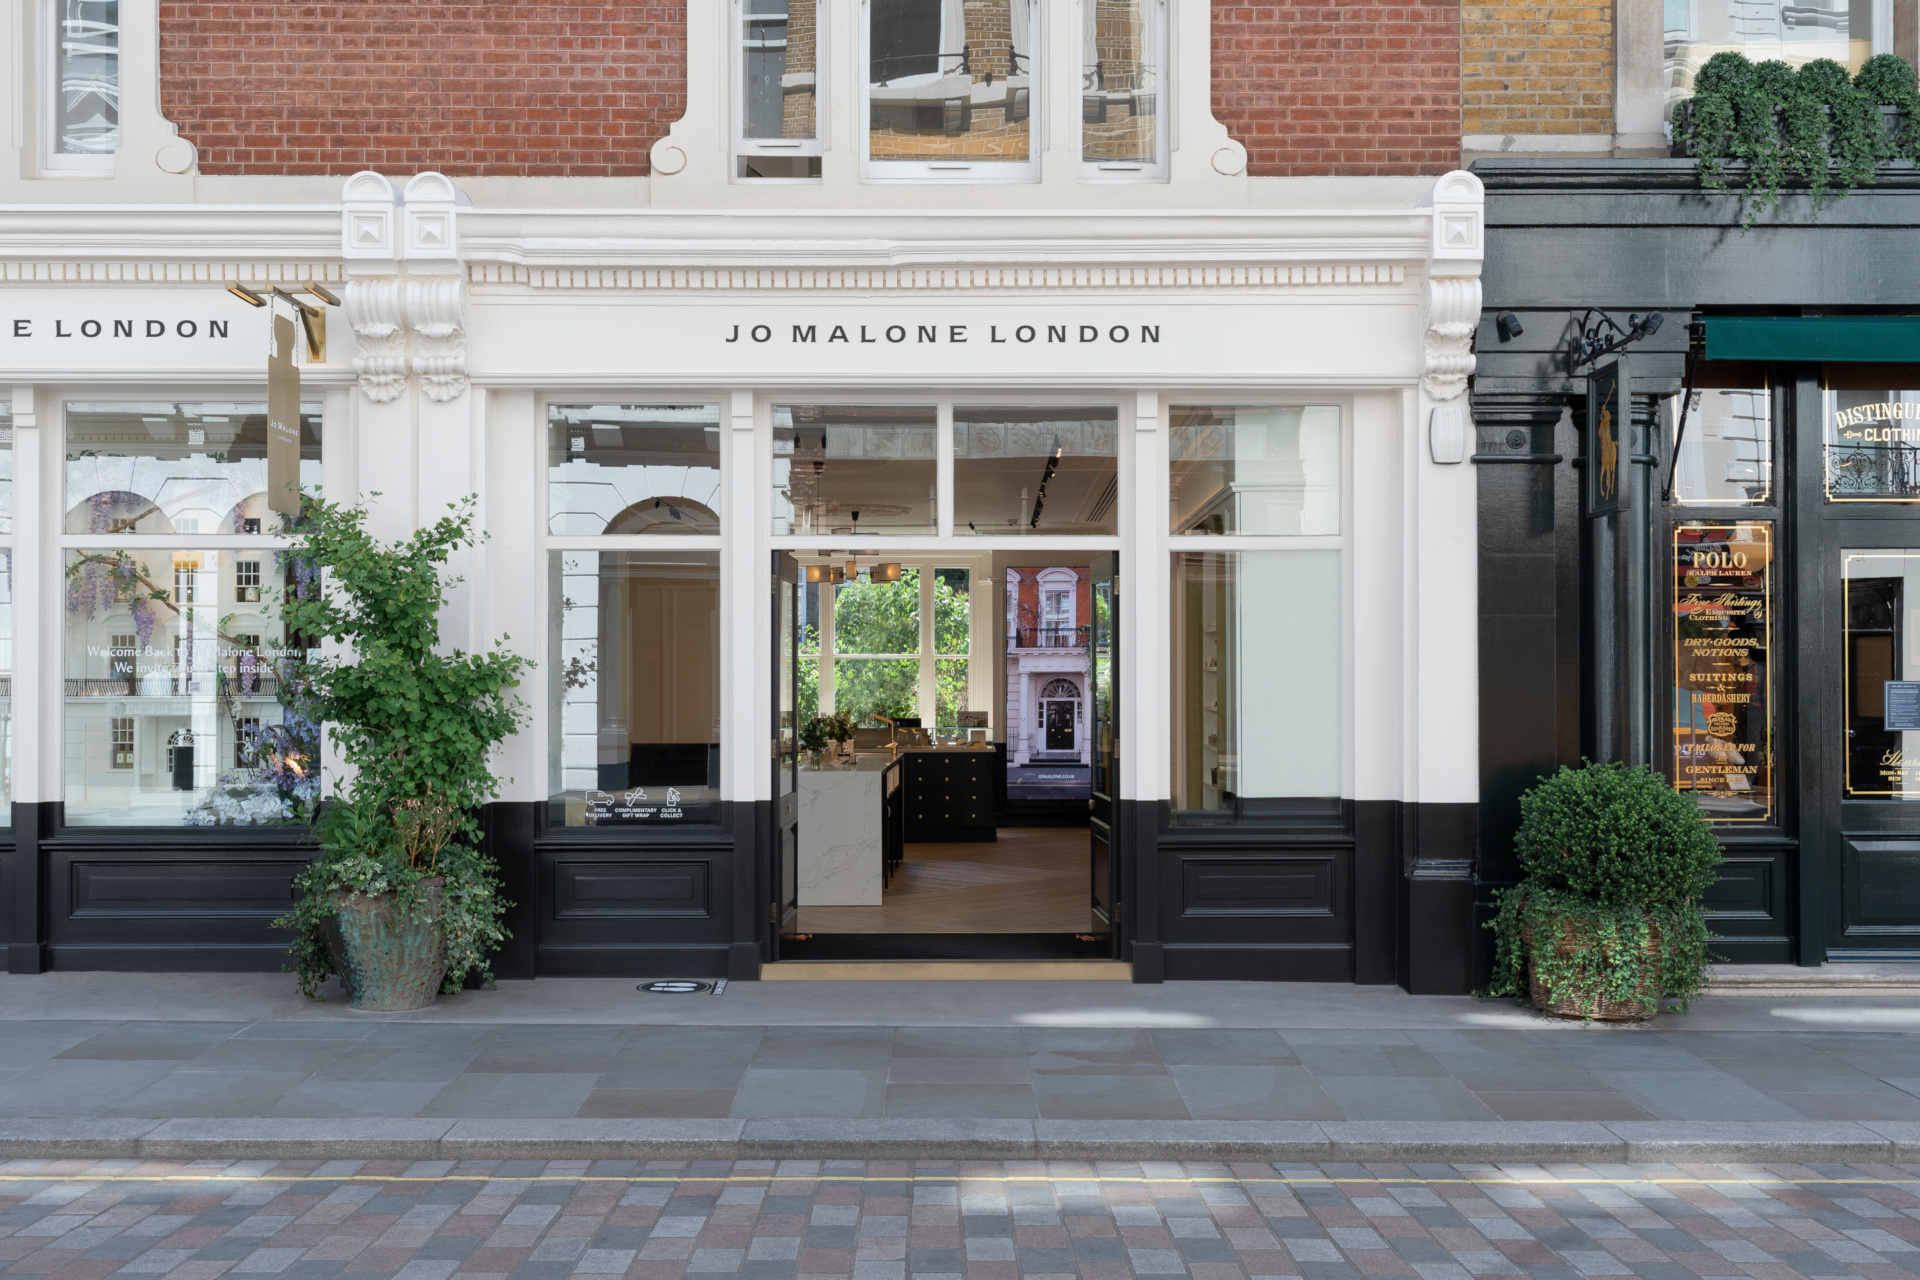 Luxury perfume house launches Covent Garden flagship - Completely